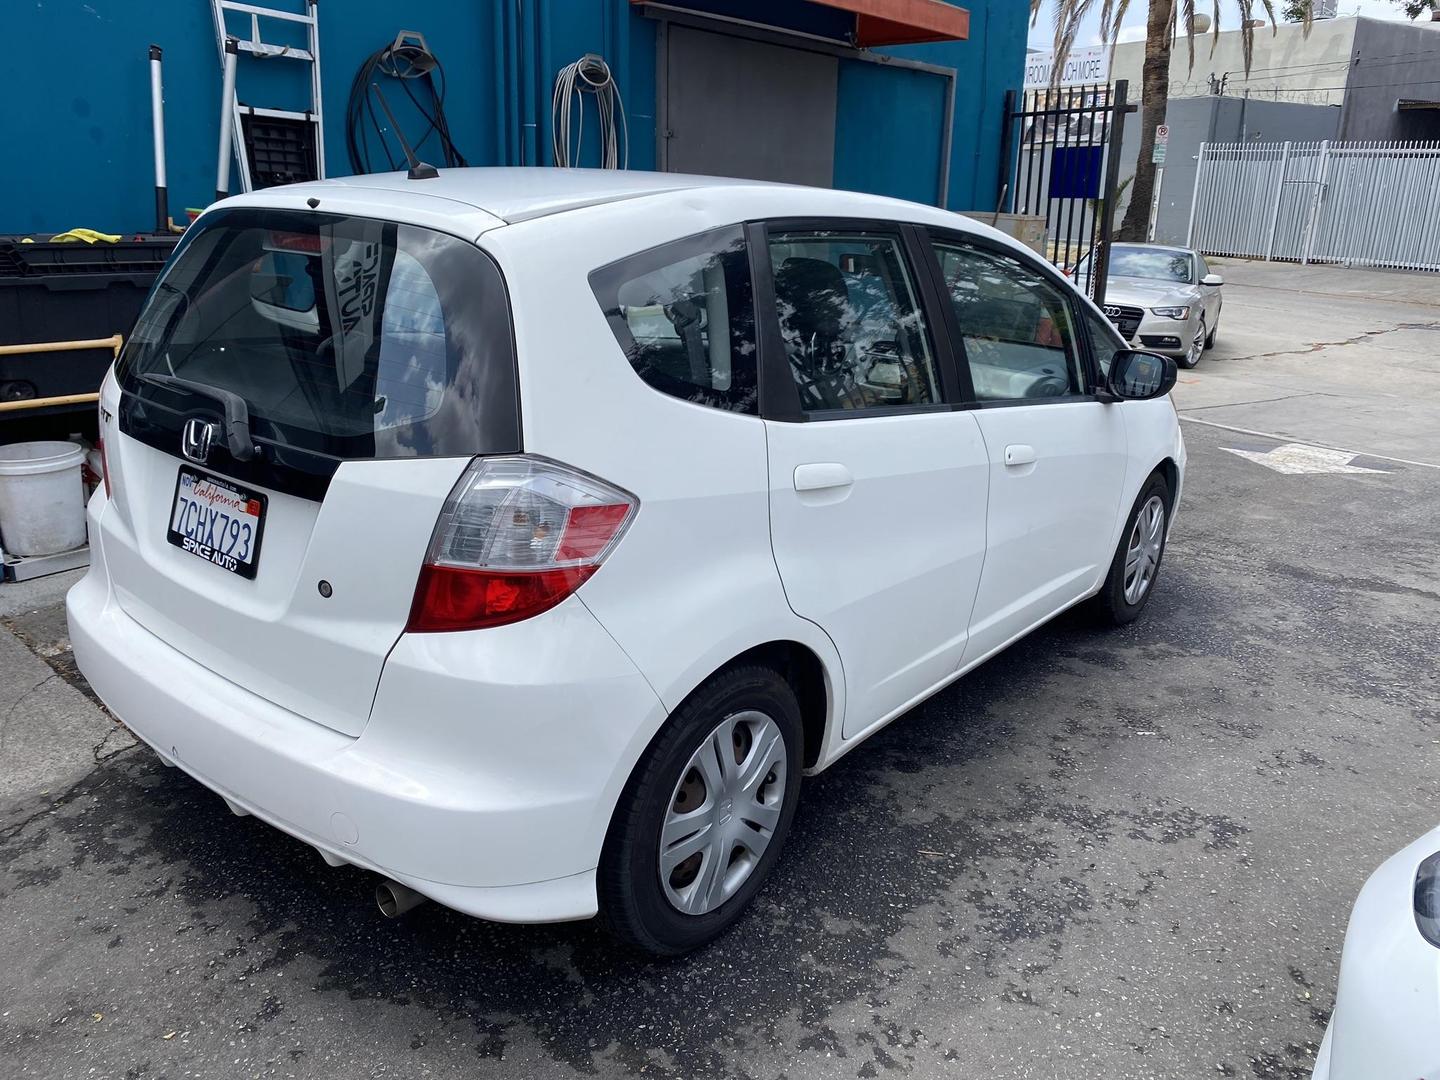 USED HONDA FIT 2009 for sale in Los Angeles, CA | Space Auto Group Inc.